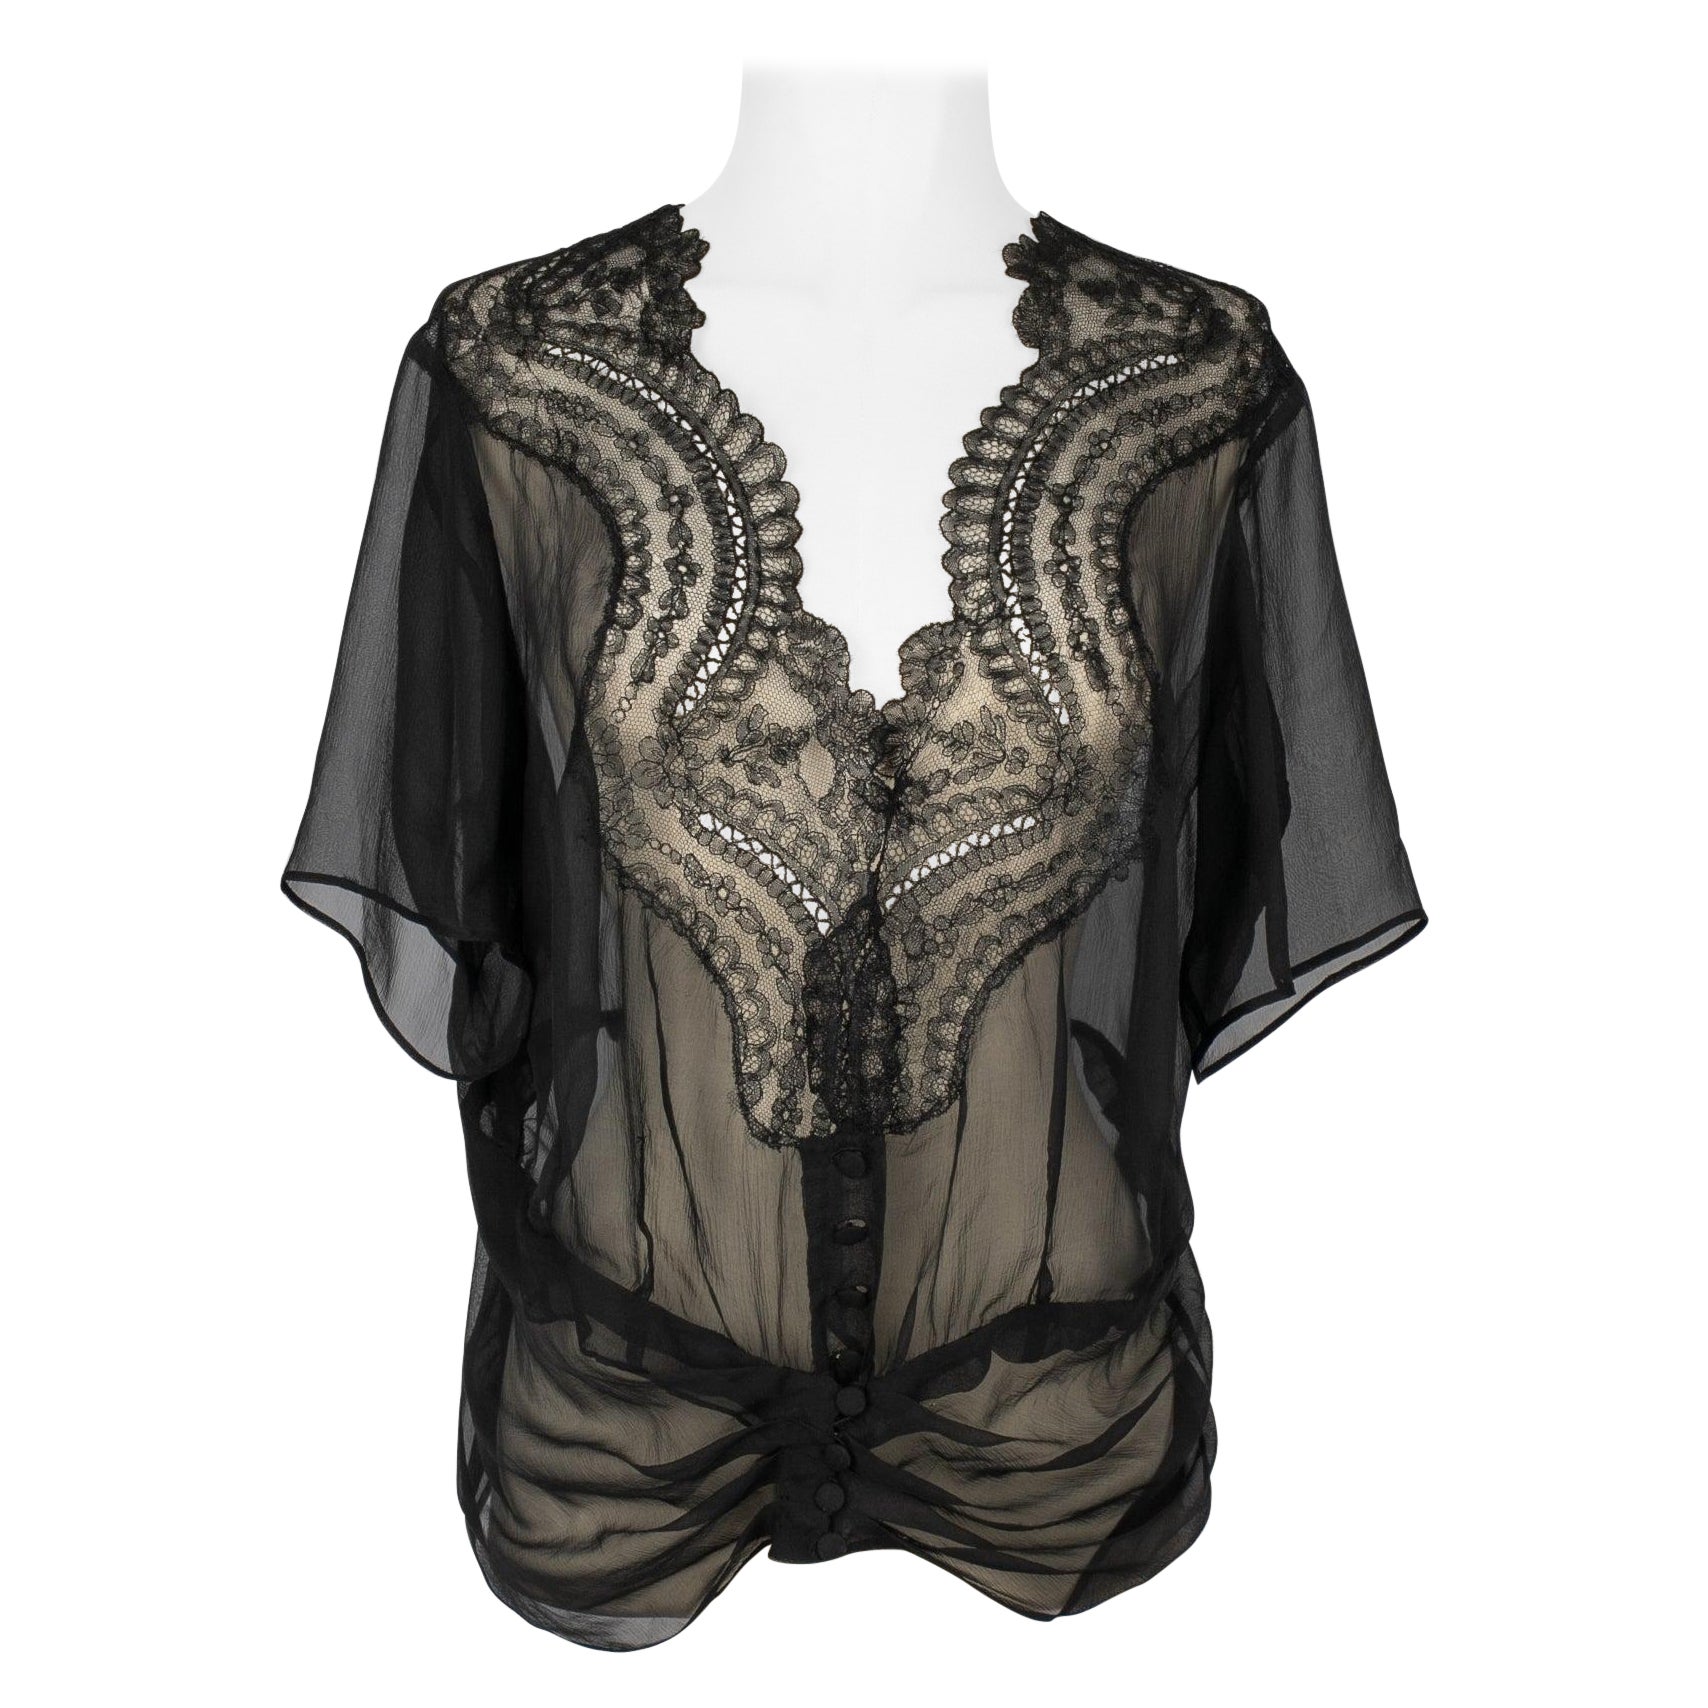 Silk Muslin with Black Lace Vintage Top For Sale